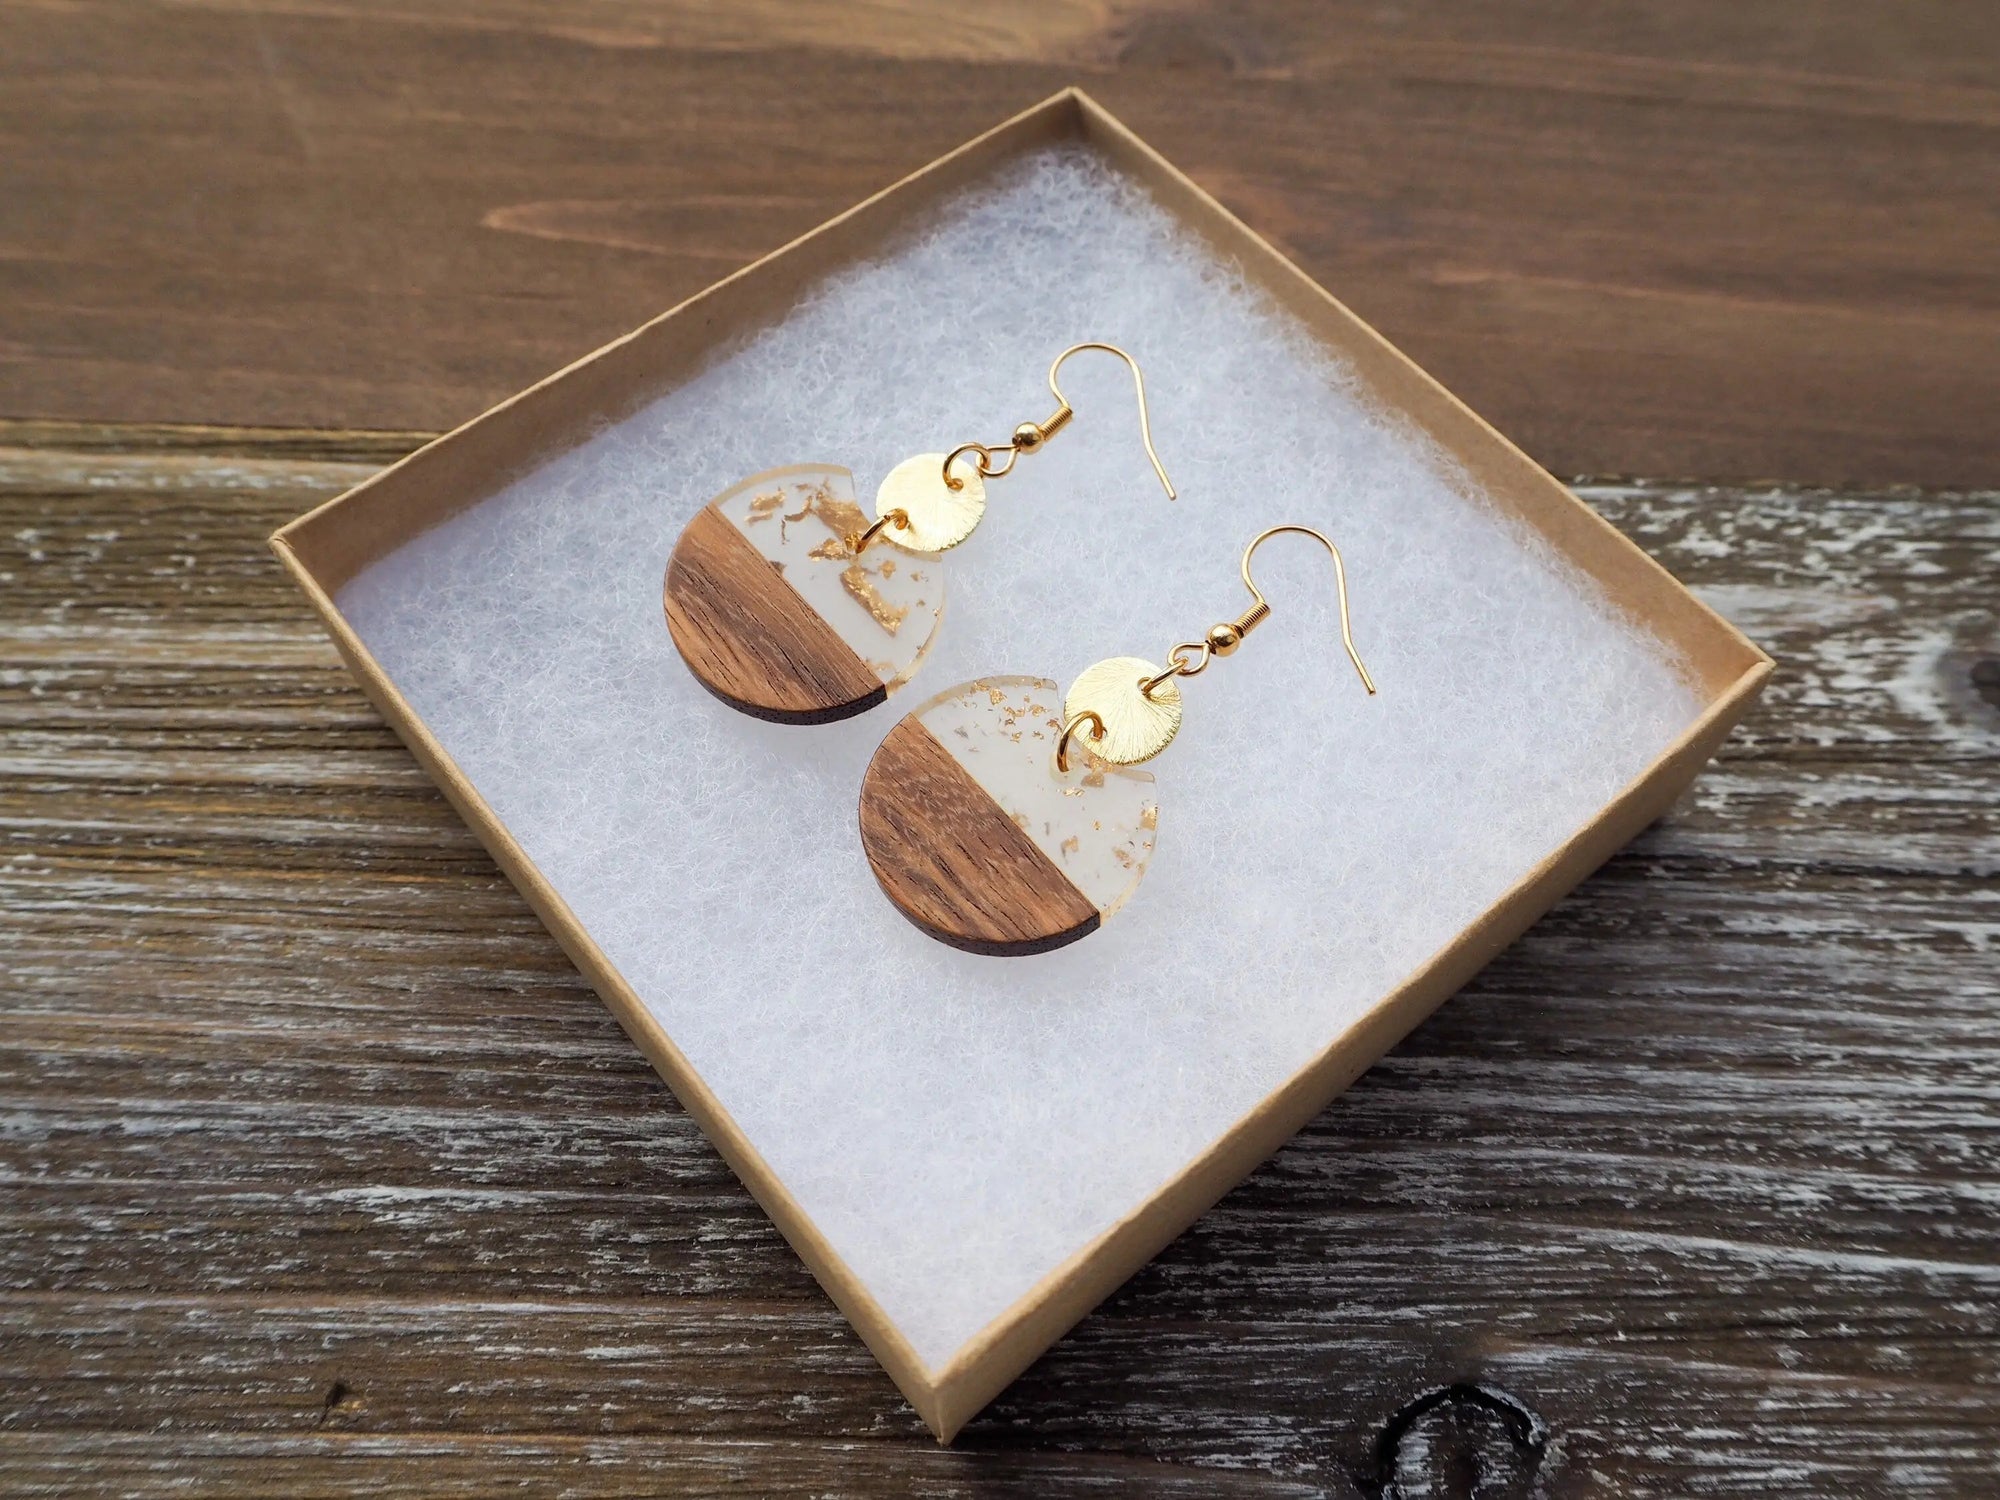 Small Gold Flakes & Wood Circle Earrings With Disc On Wooden